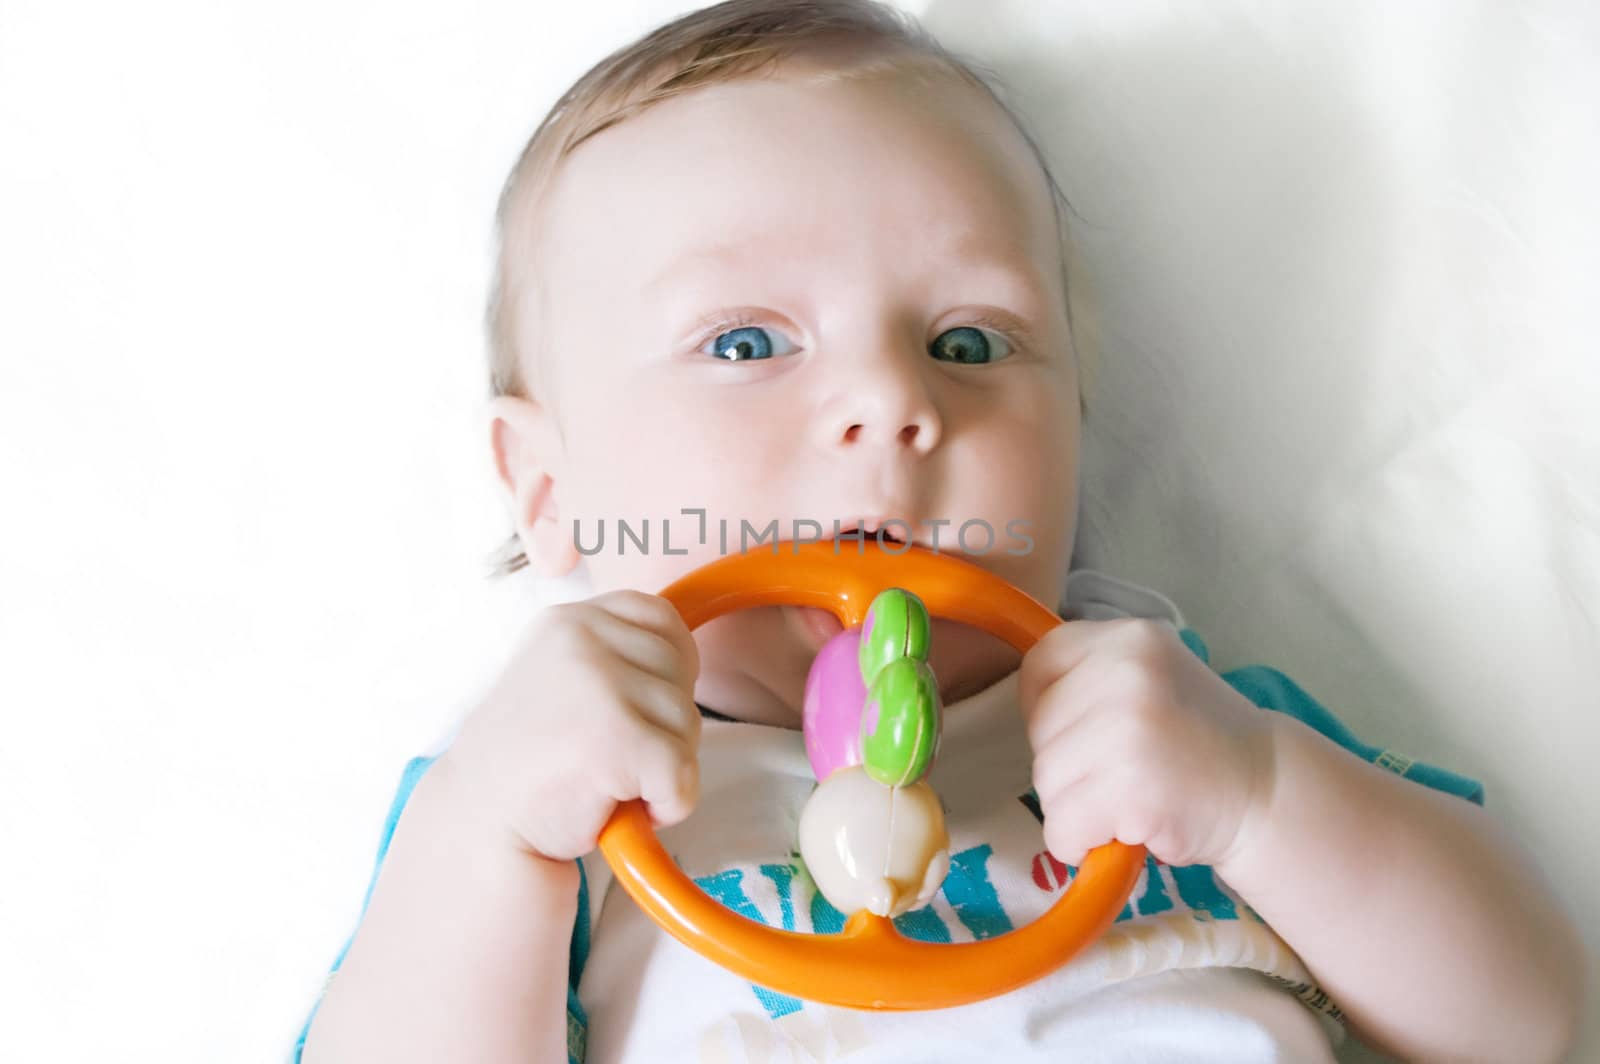 Little baby boy playing with rattle over light background